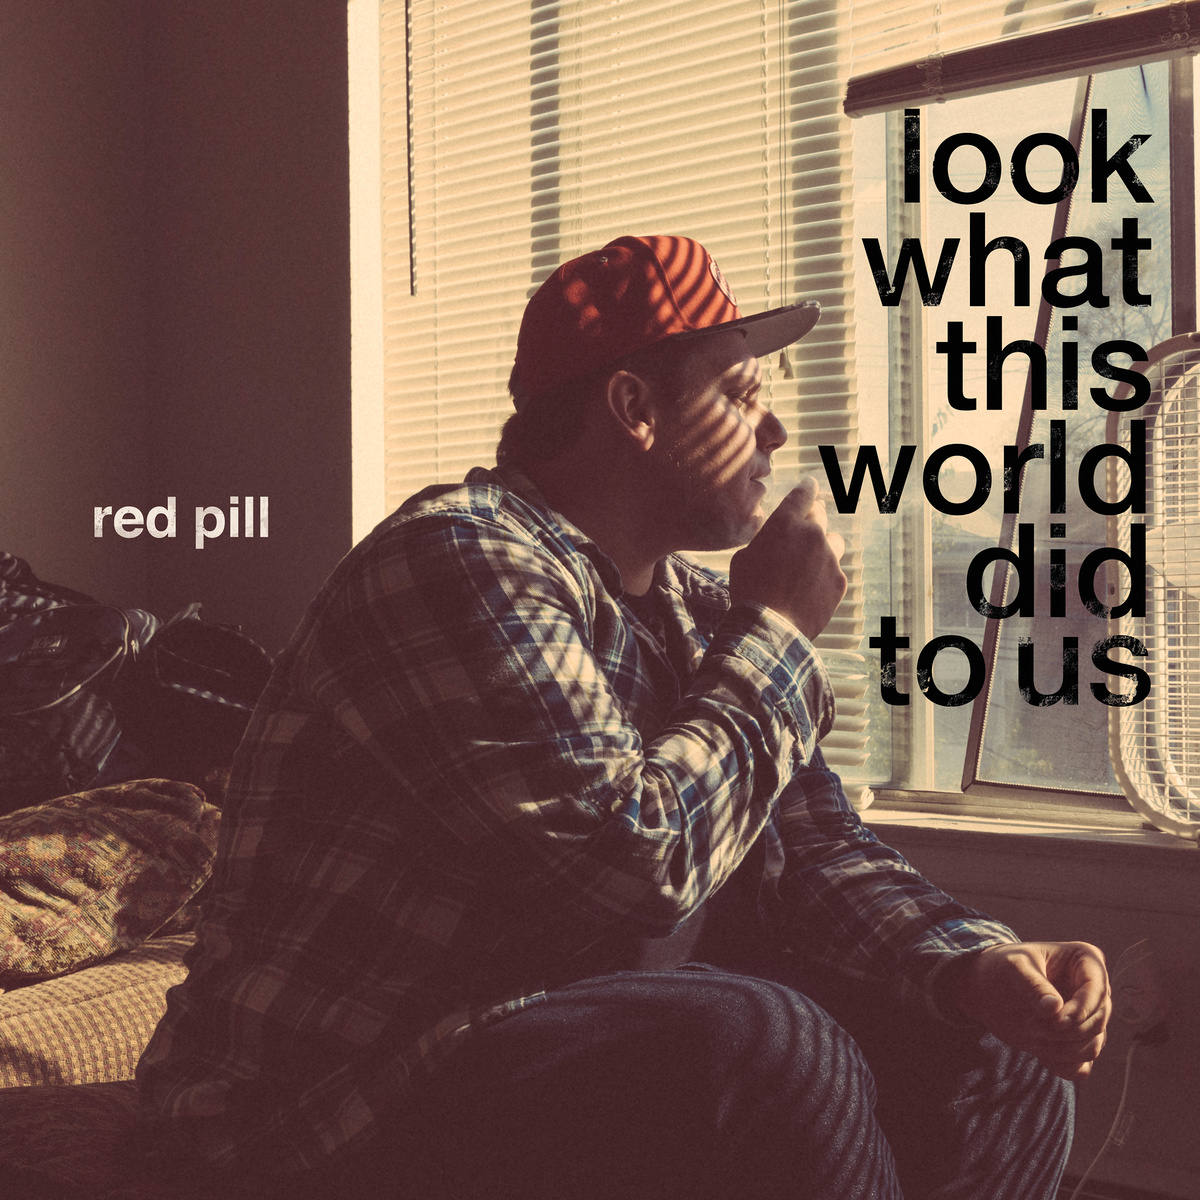 Red Pill - "Ten Year Party" (Video)